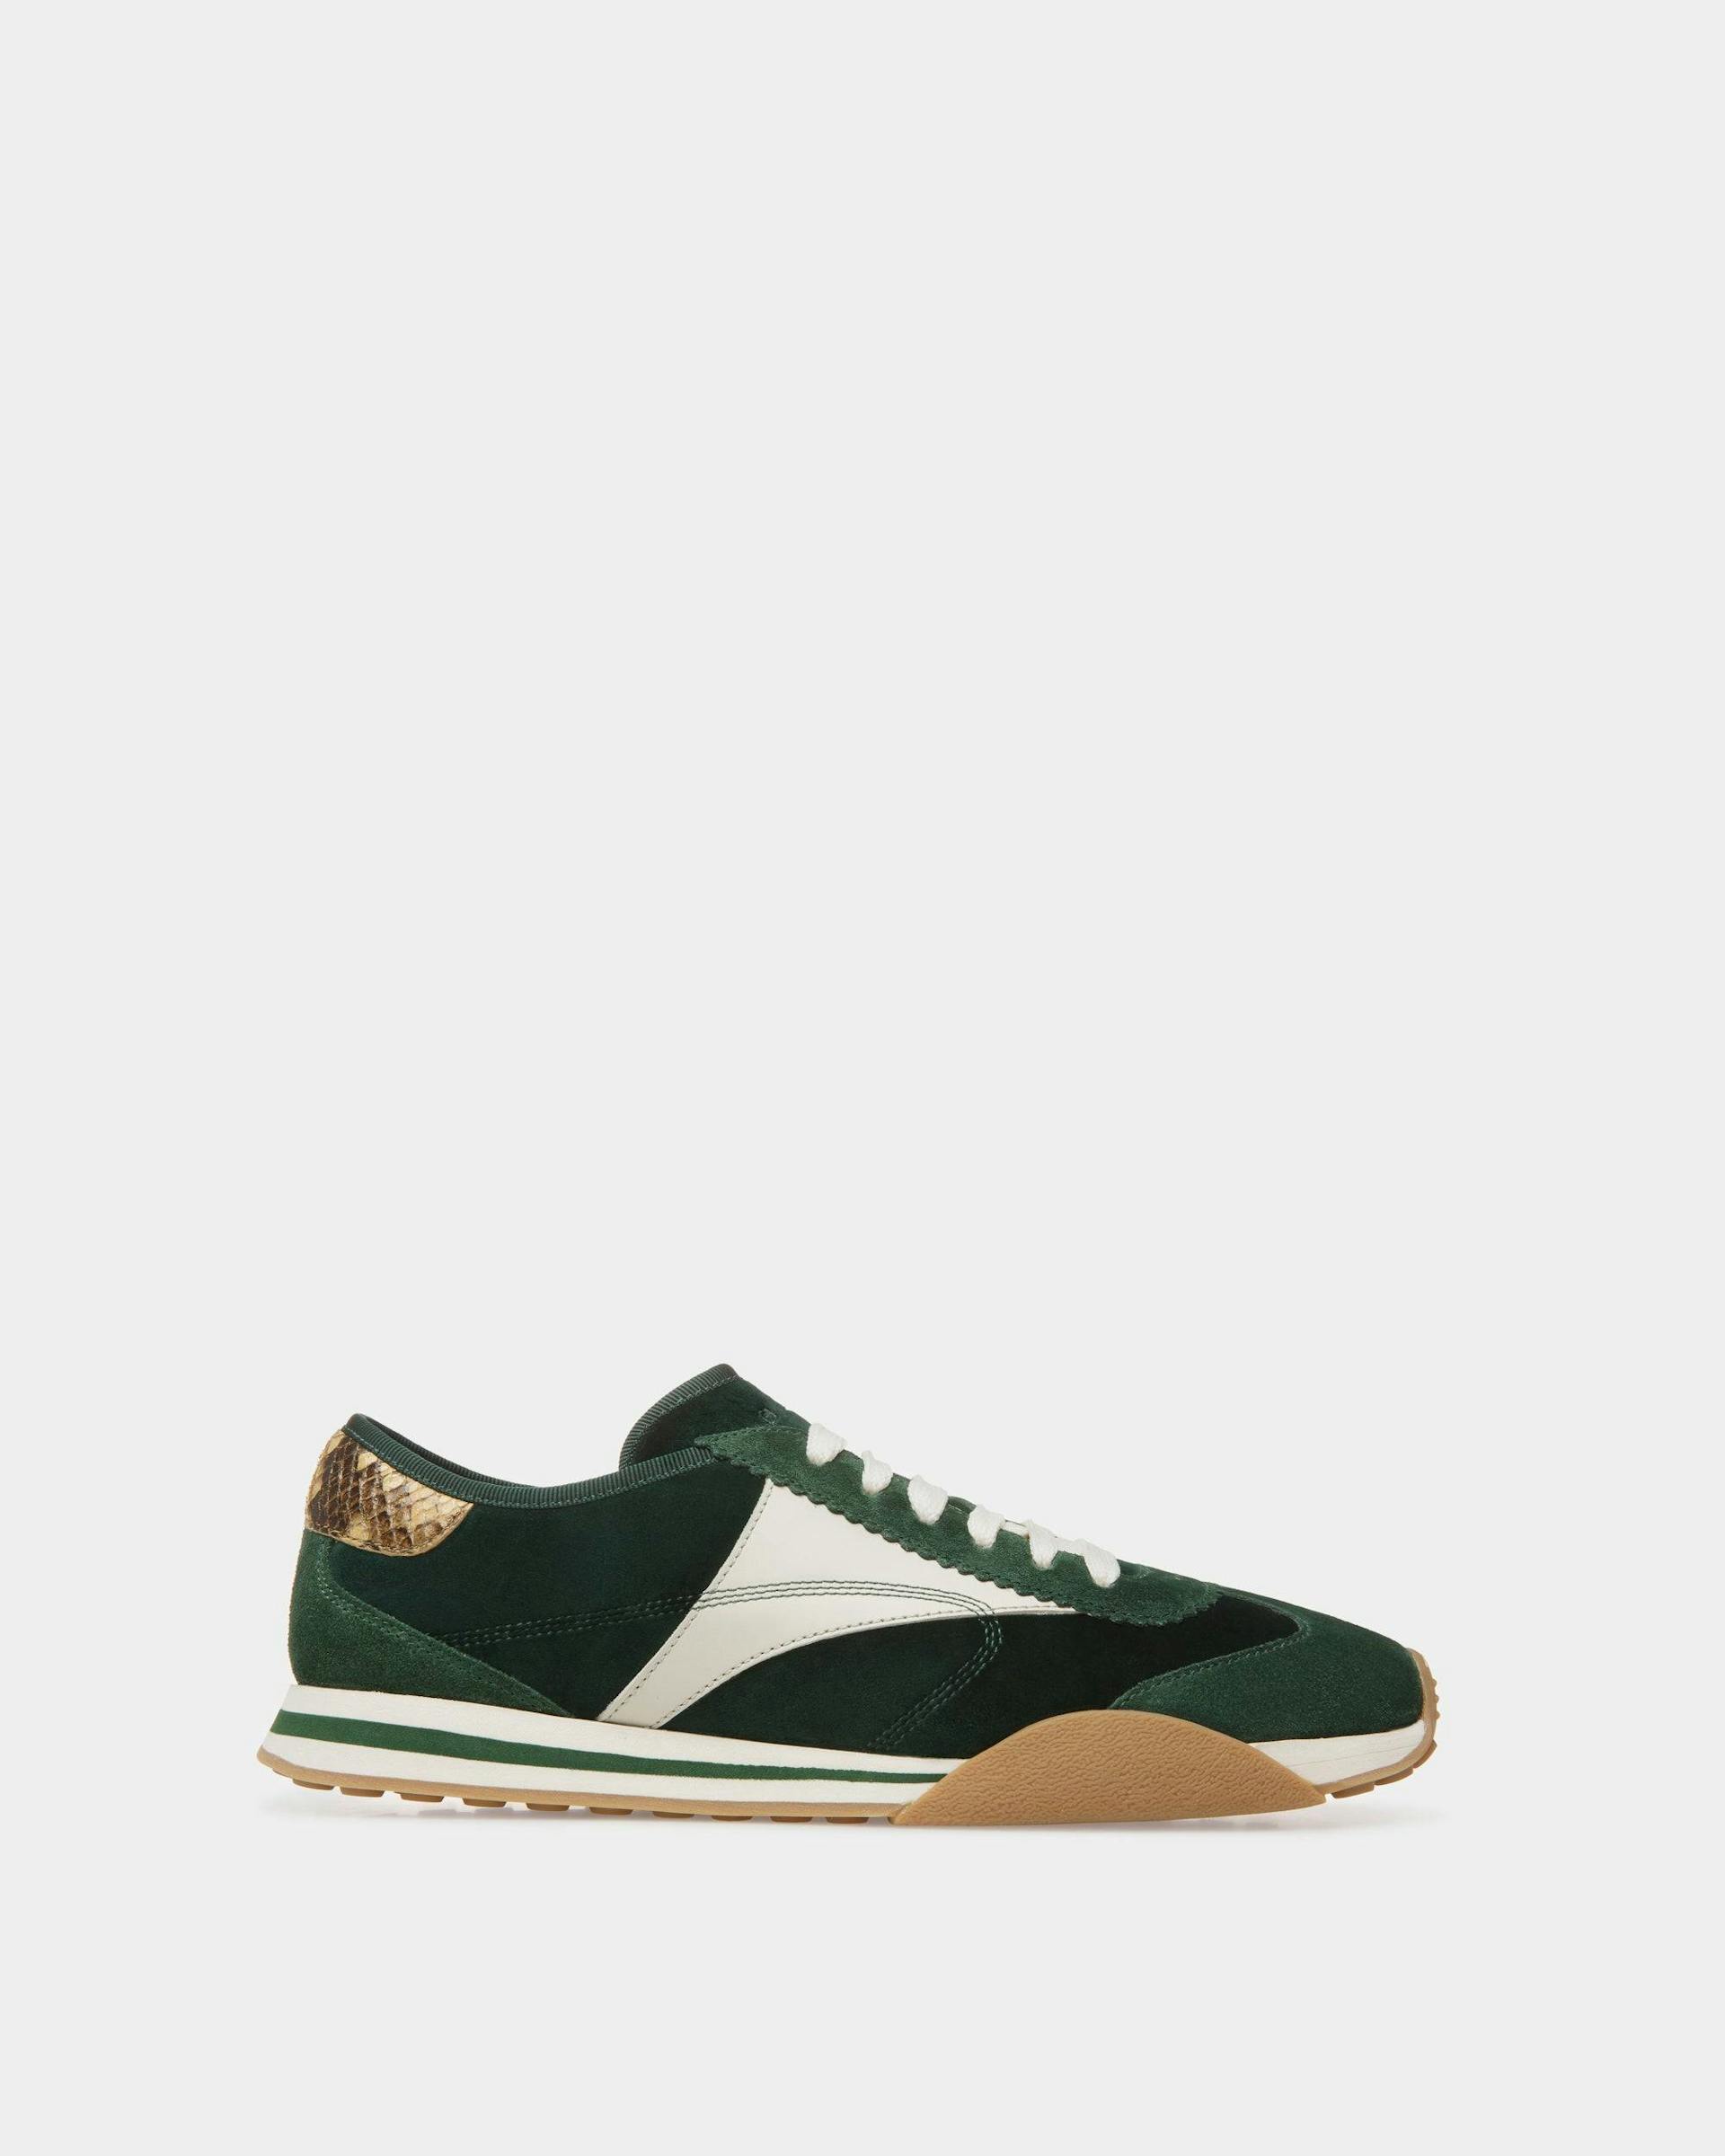 Sussex Sneakers In Green And Dusty White Leather And Cotton - Men's - Bally - 01